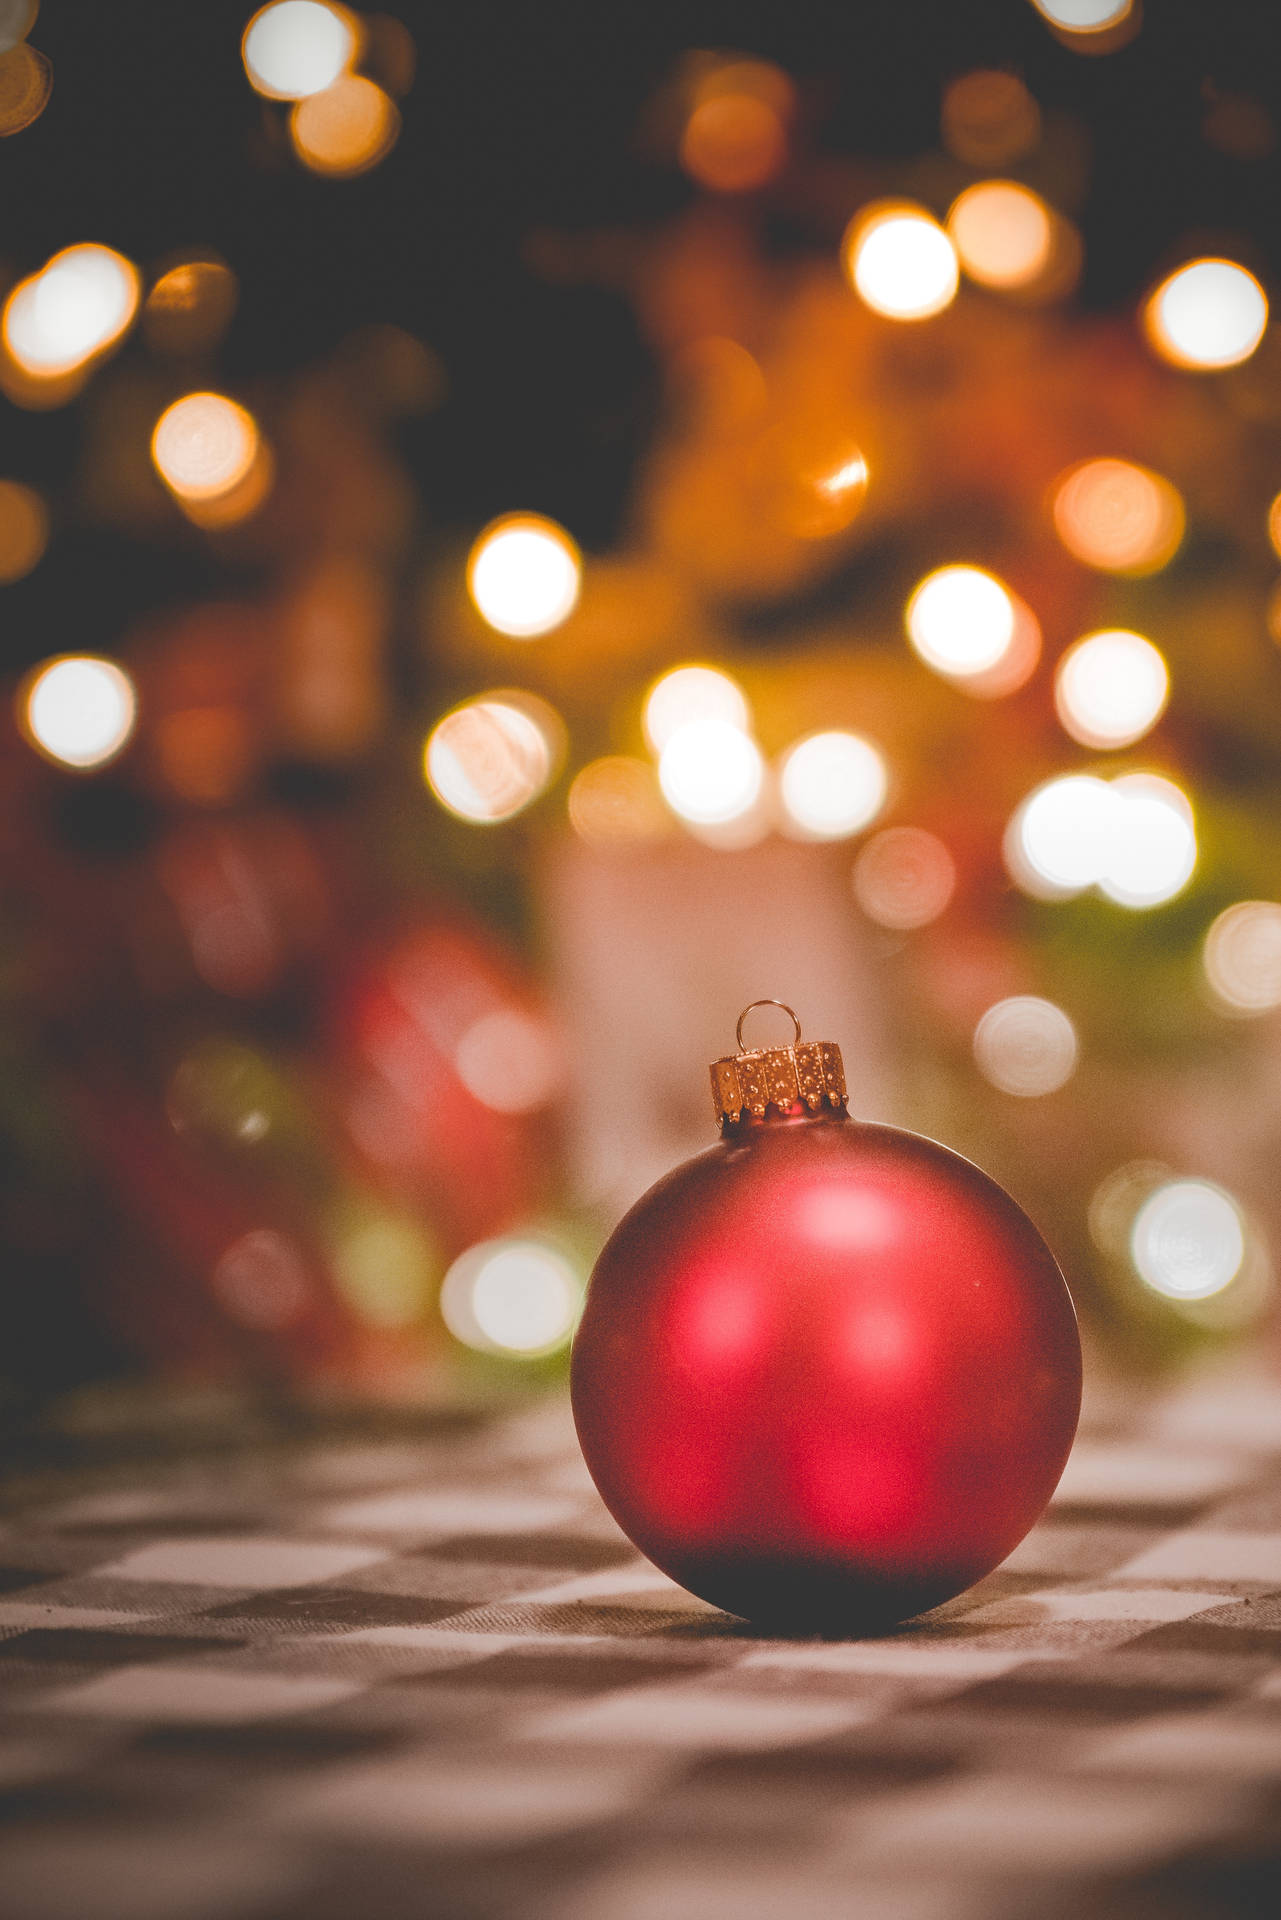 Simple High Resolution Christmas Ornament Background